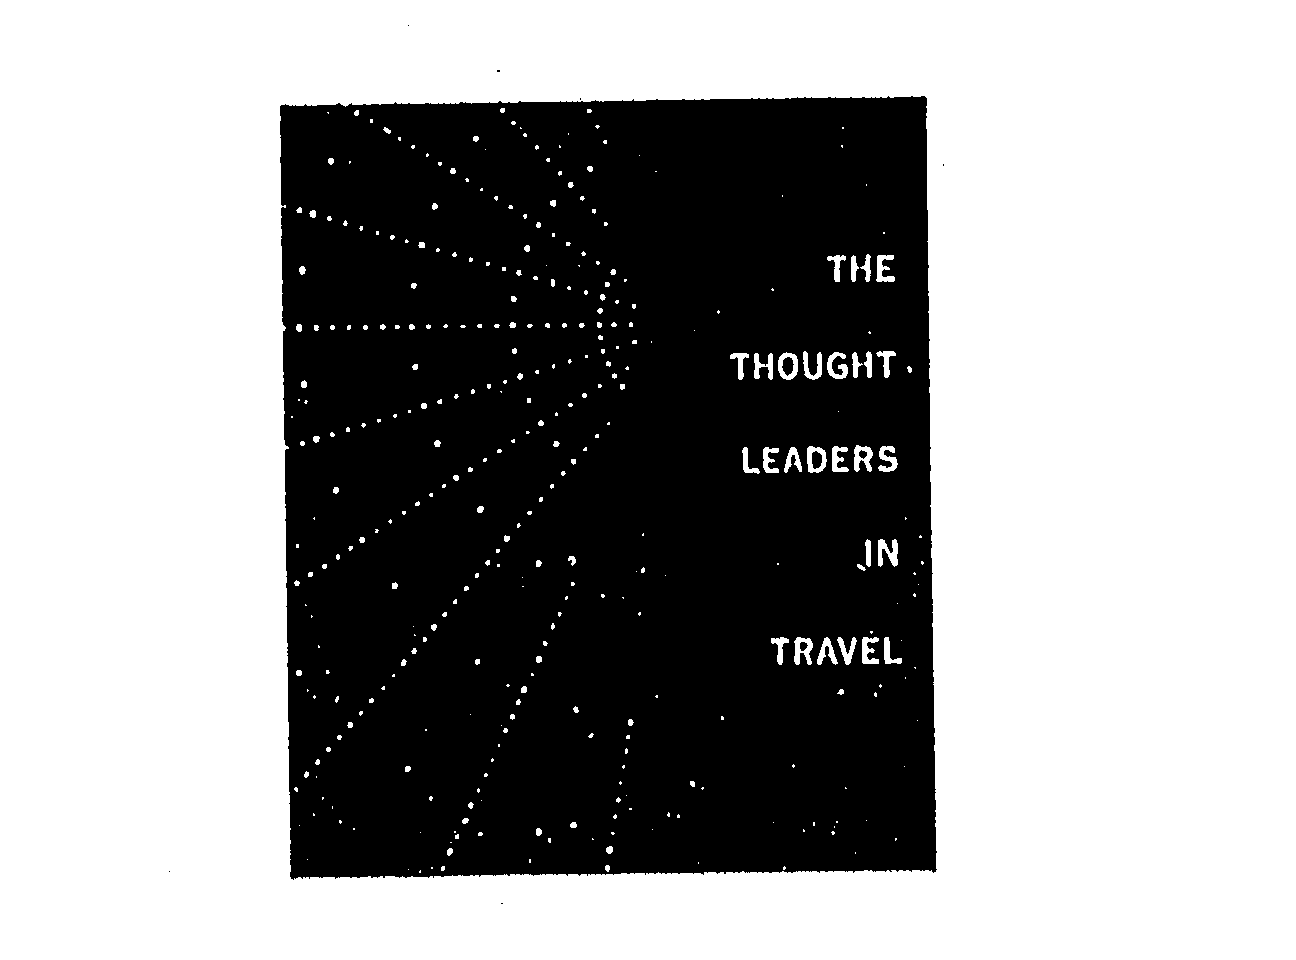  THE THOUGHT LEADERS IN TRAVEL